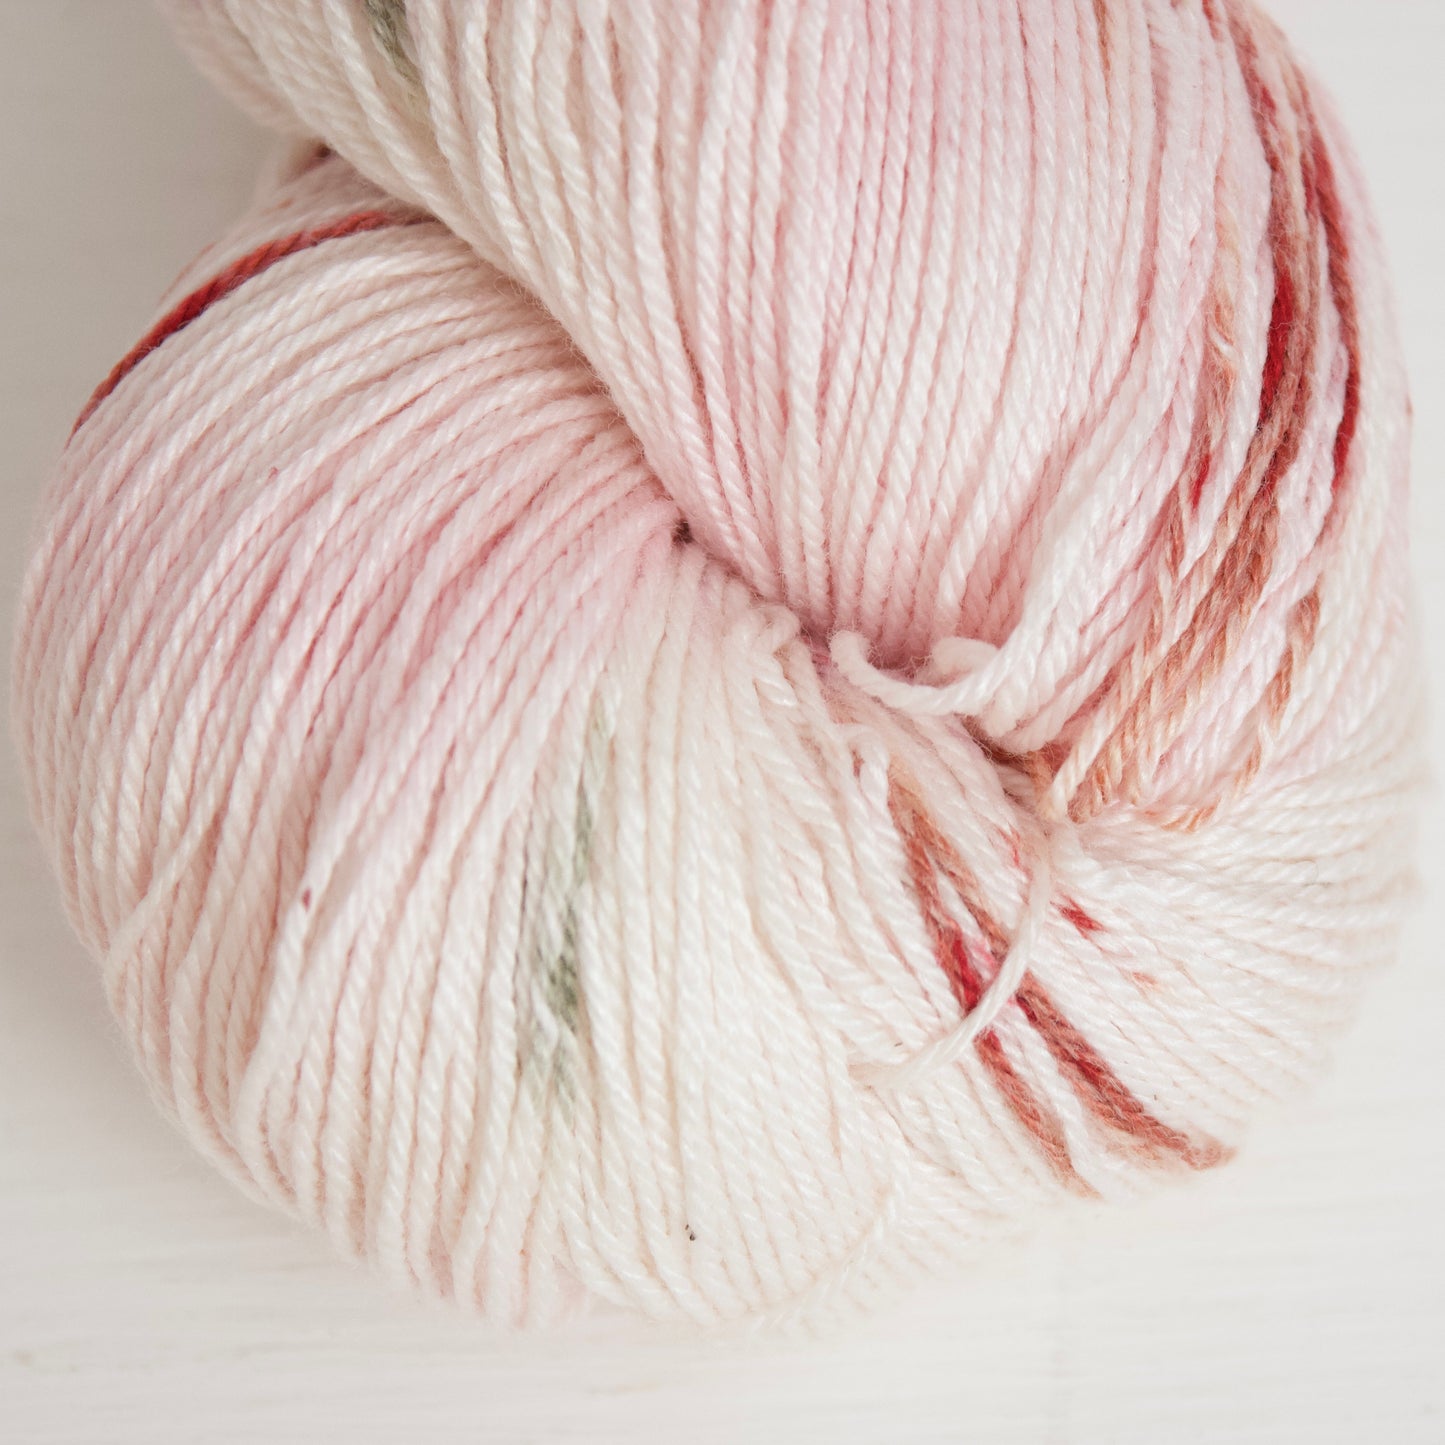 Cinnamon Sage Rose on Albireo is a creamy white base with tints of light pink and dashes of red-brown, and burgundy with purple halos, and strikes of sage green.